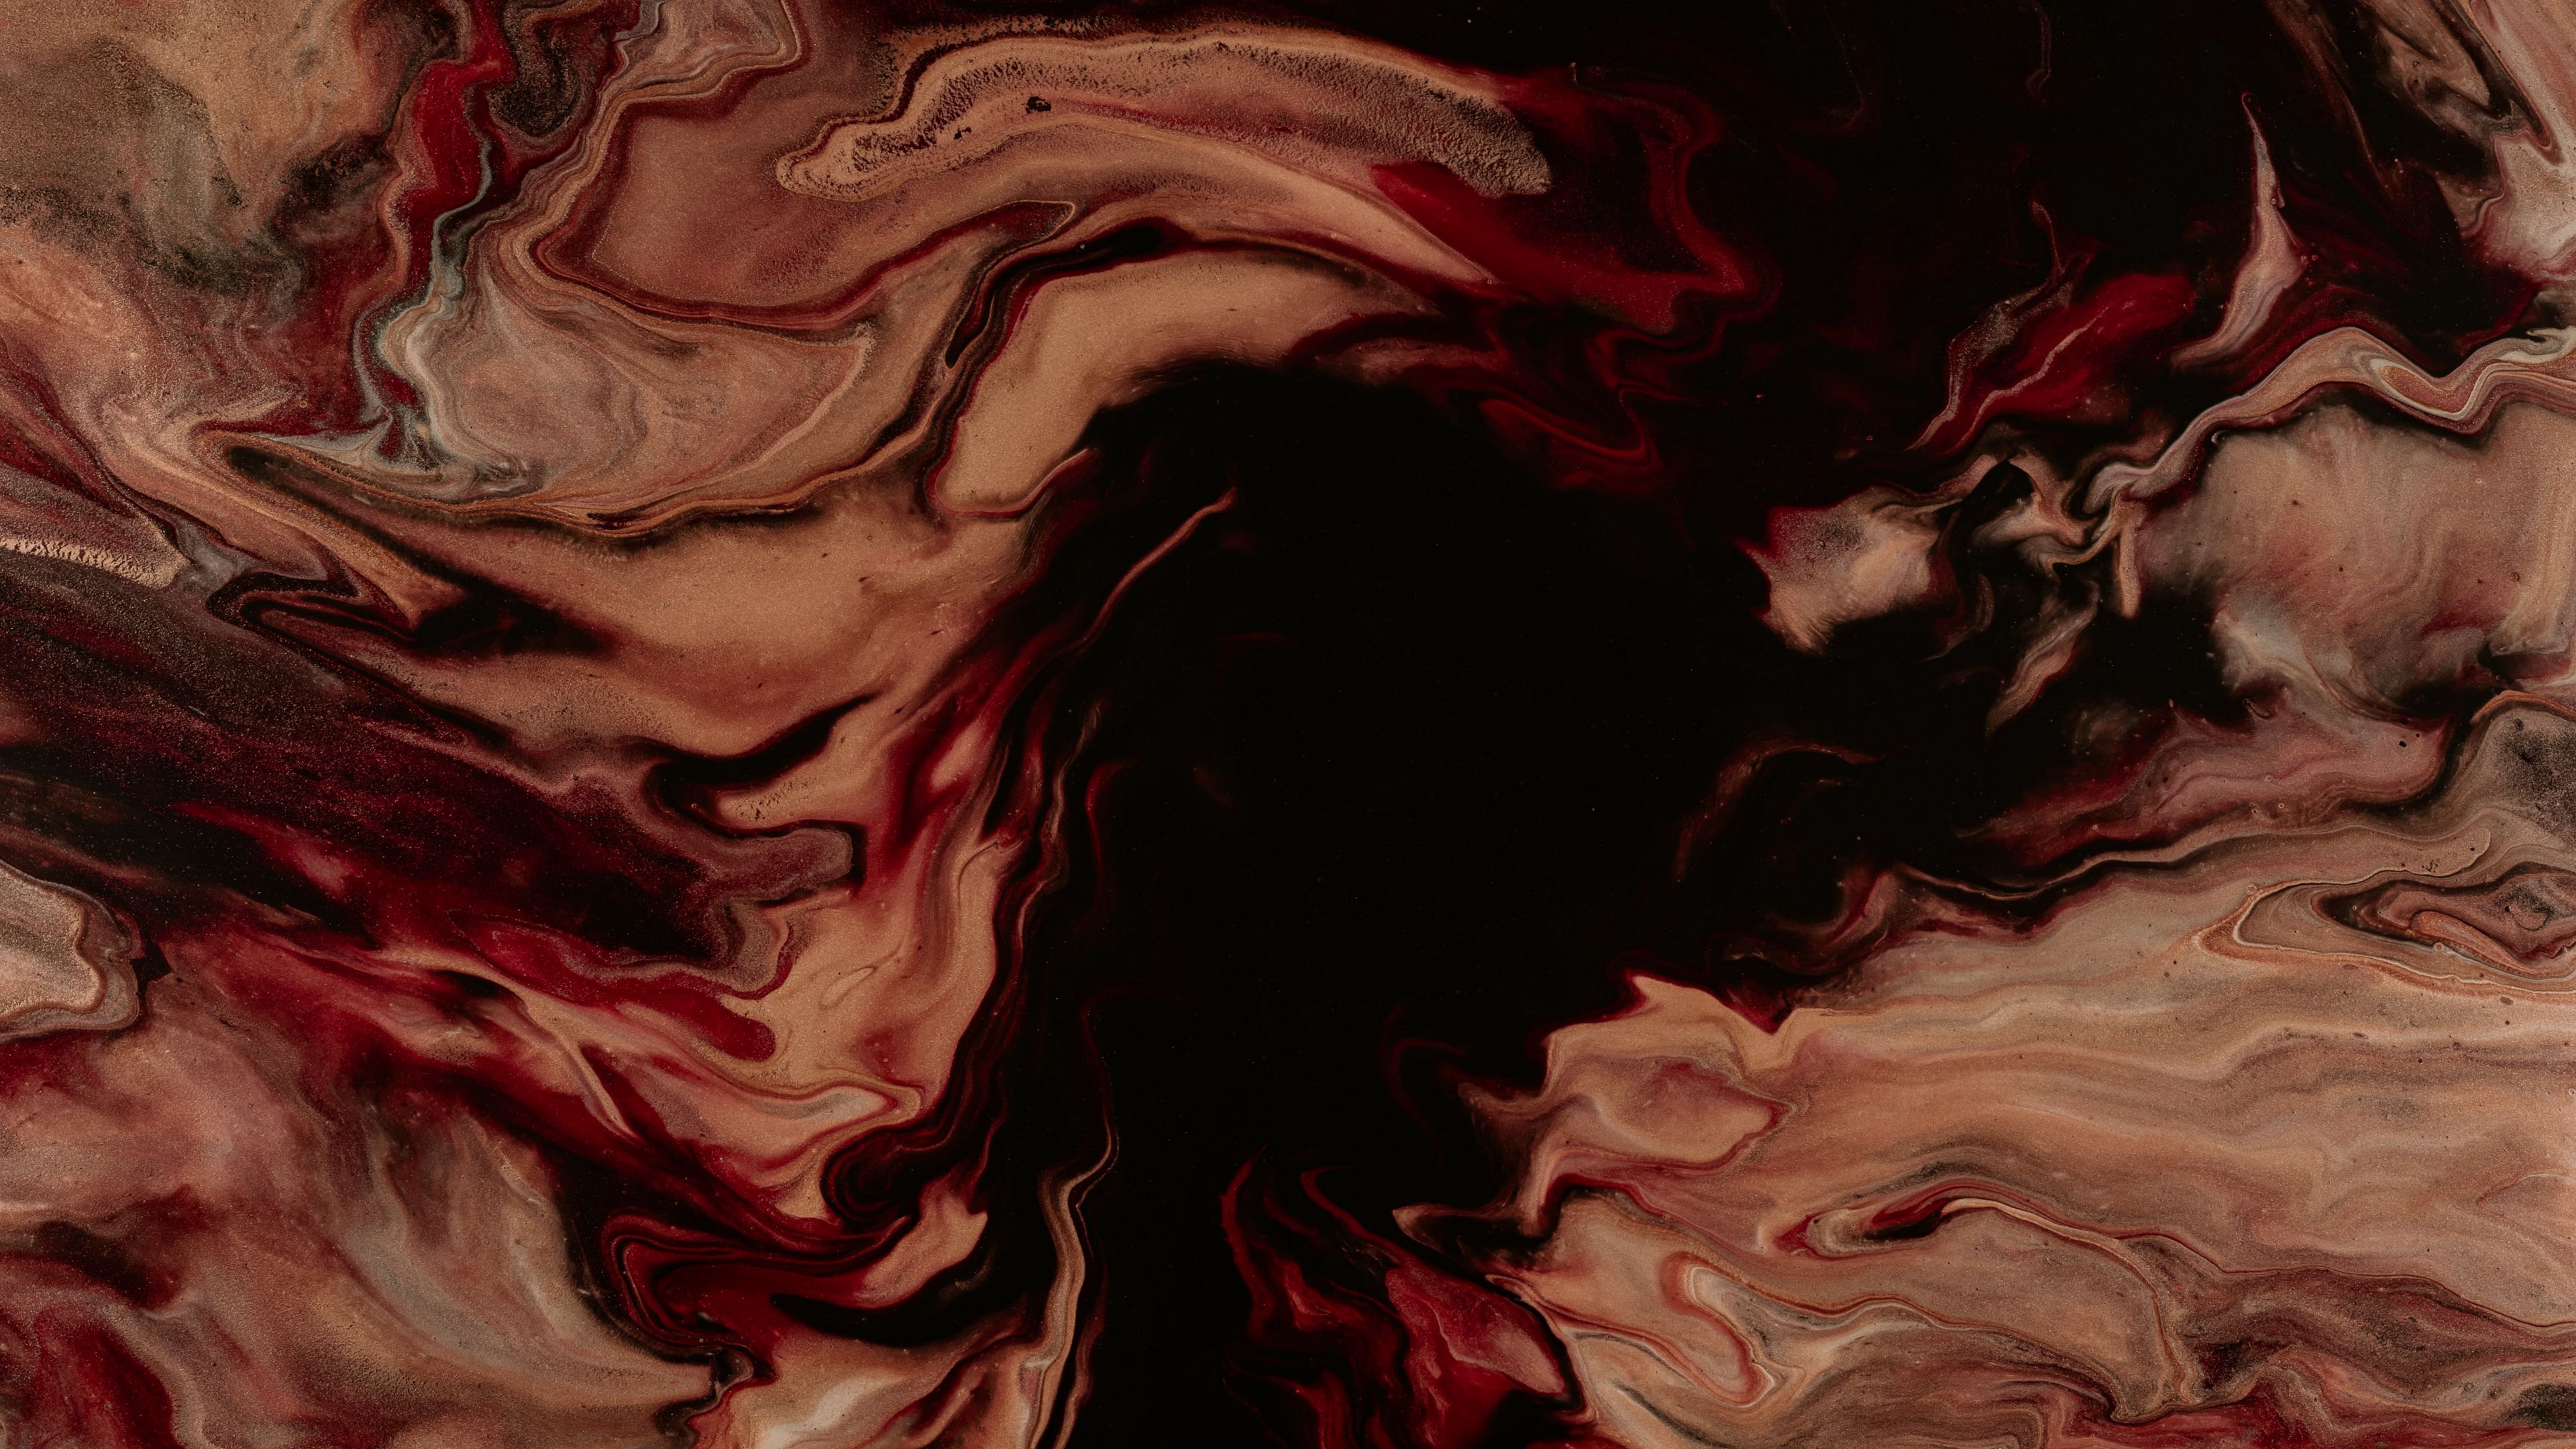 Download wallpaper 3840x2160 stains, paint, liquid, brown, red, black 4k uhd 16:9 HD background